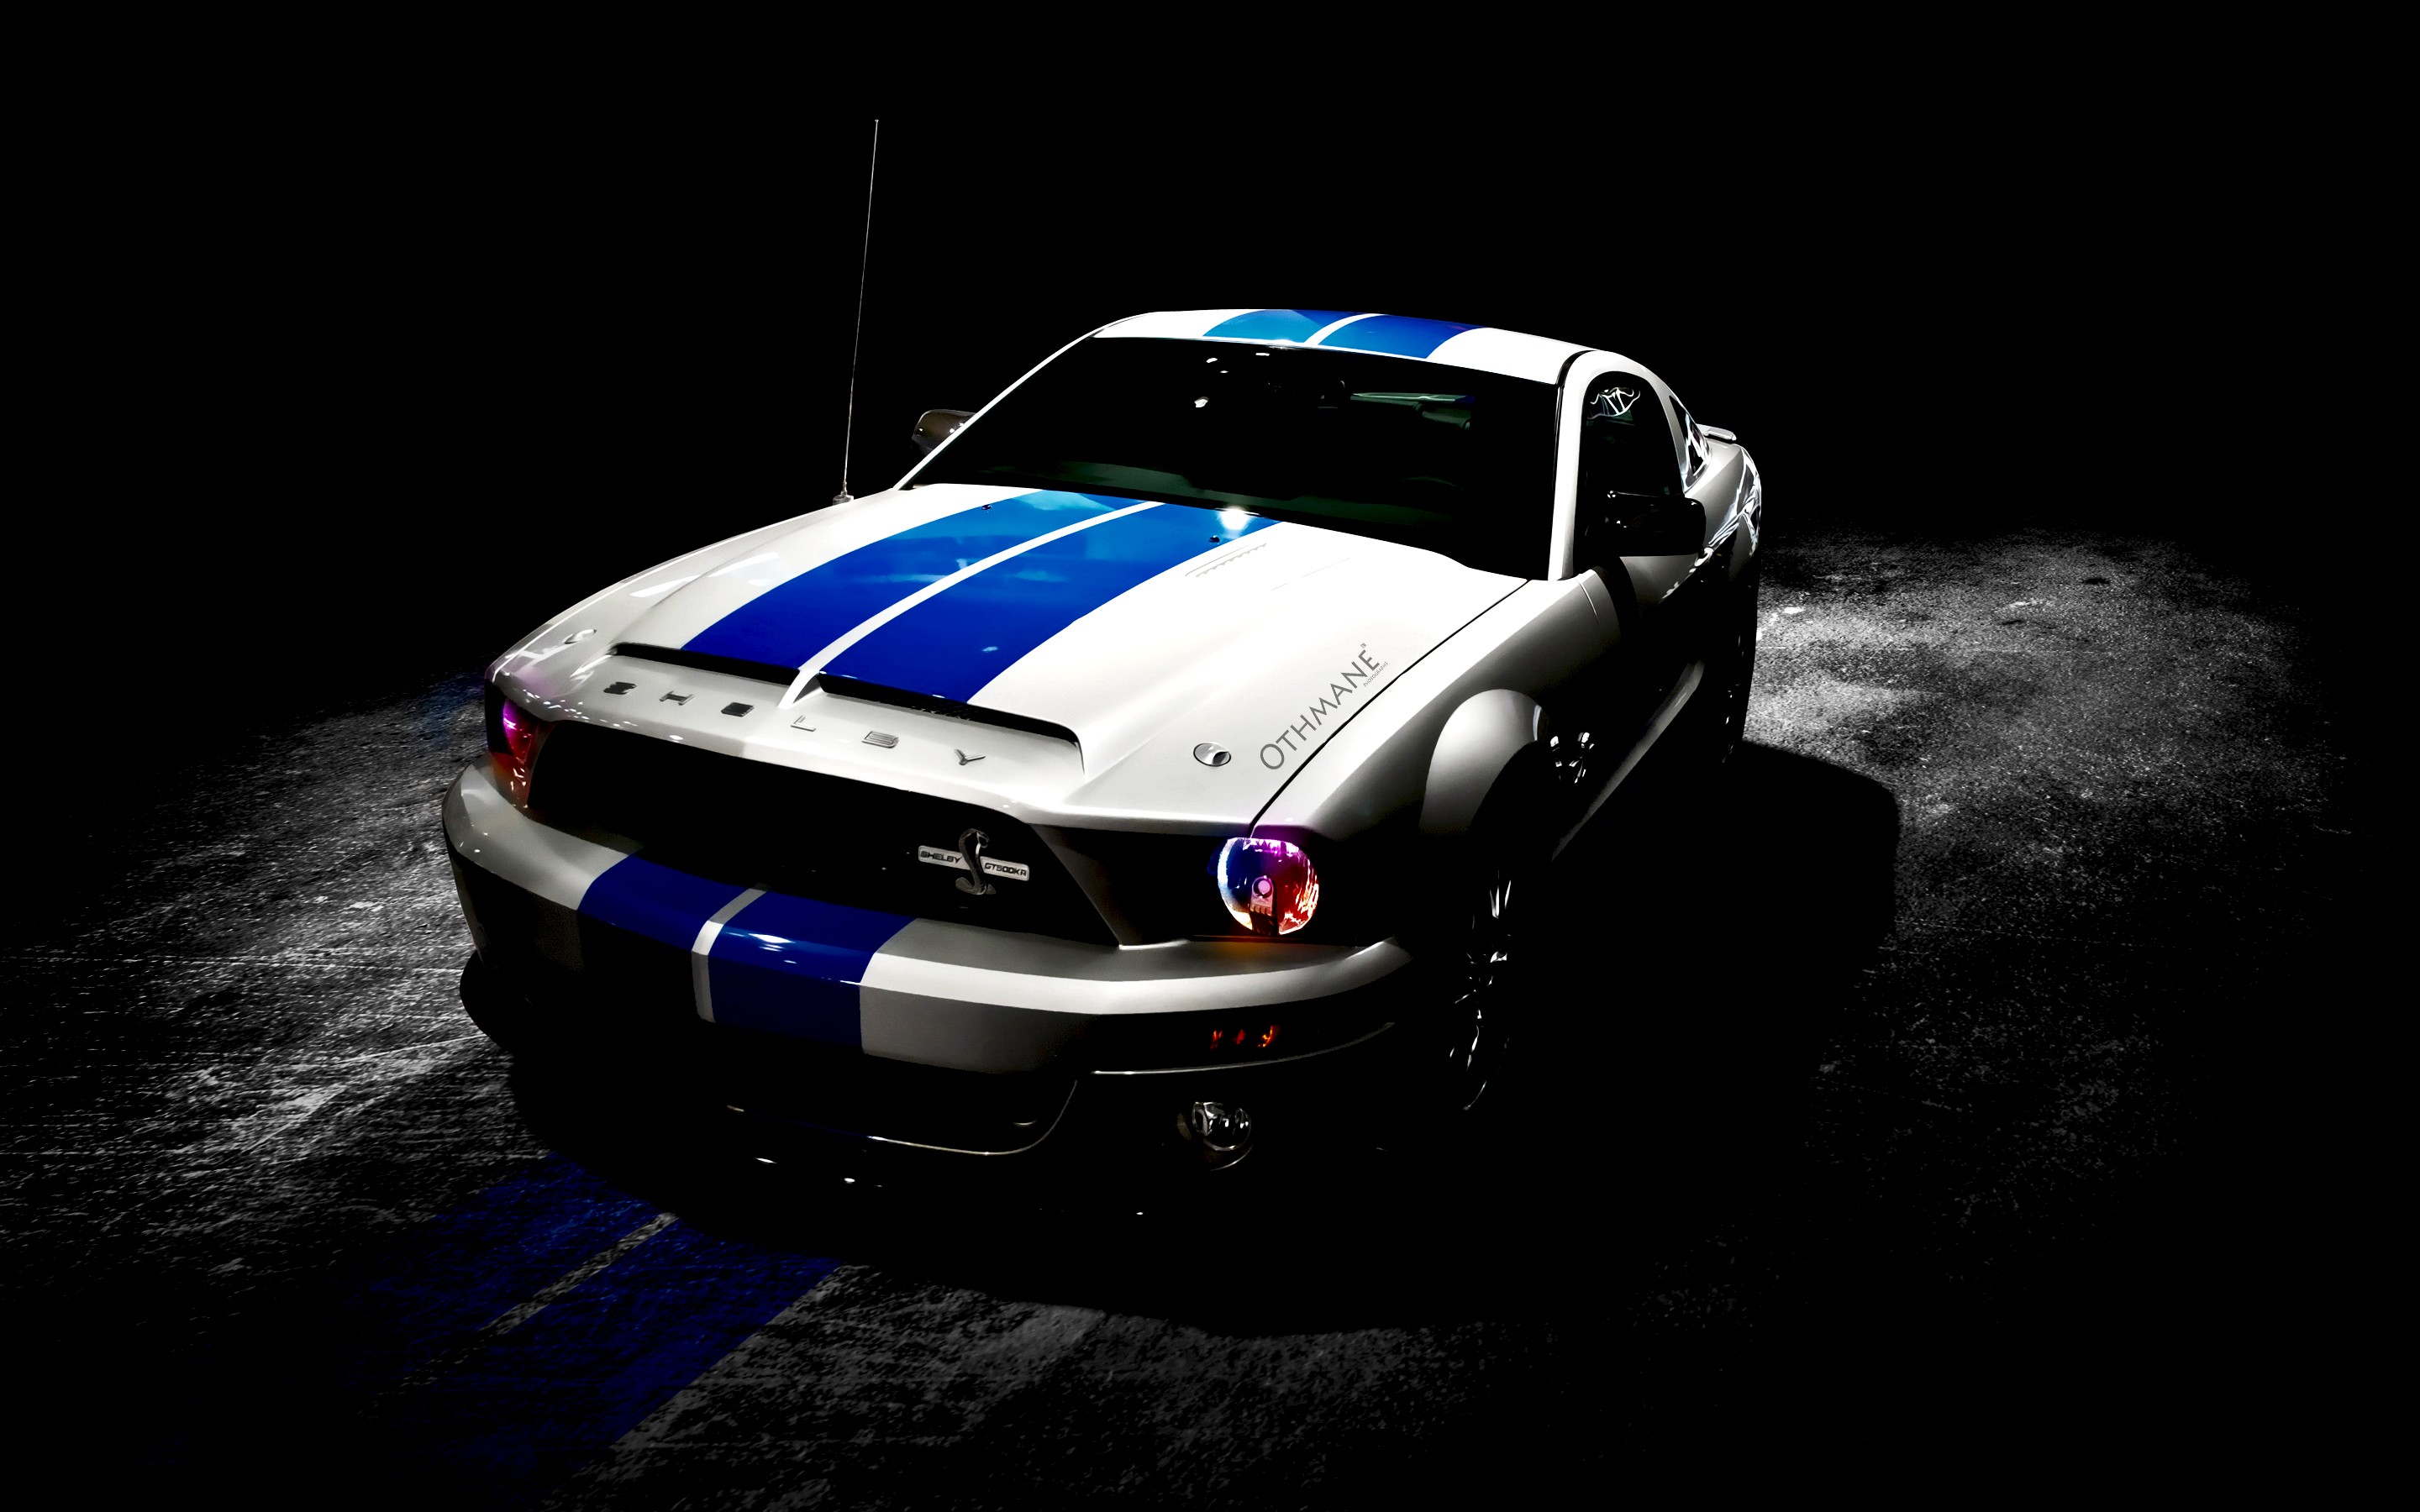 General 2880x1800 car white cars vehicle Shelby dark racing stripes Ford Ford Mustang muscle cars American cars